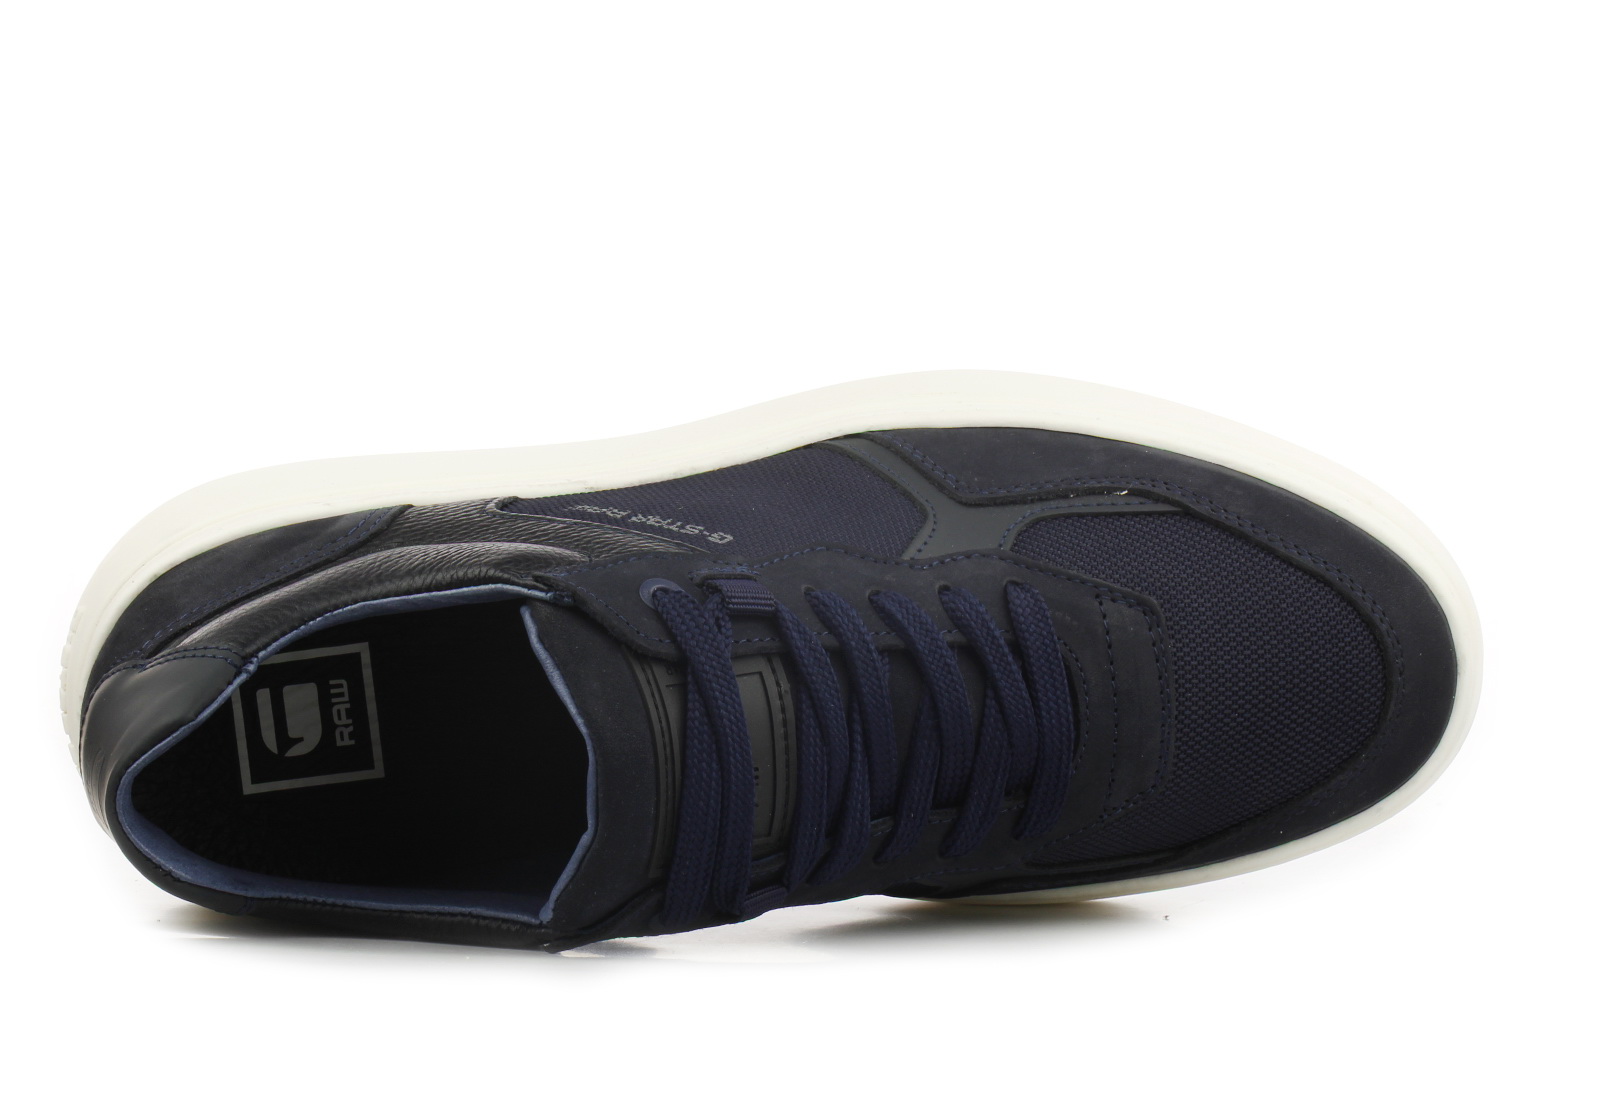 Antarctica dump Gewoon overlopen G-Star RAW Trainers - Lash - 12-009508-7300 - Online shop for sneakers,  shoes and boots